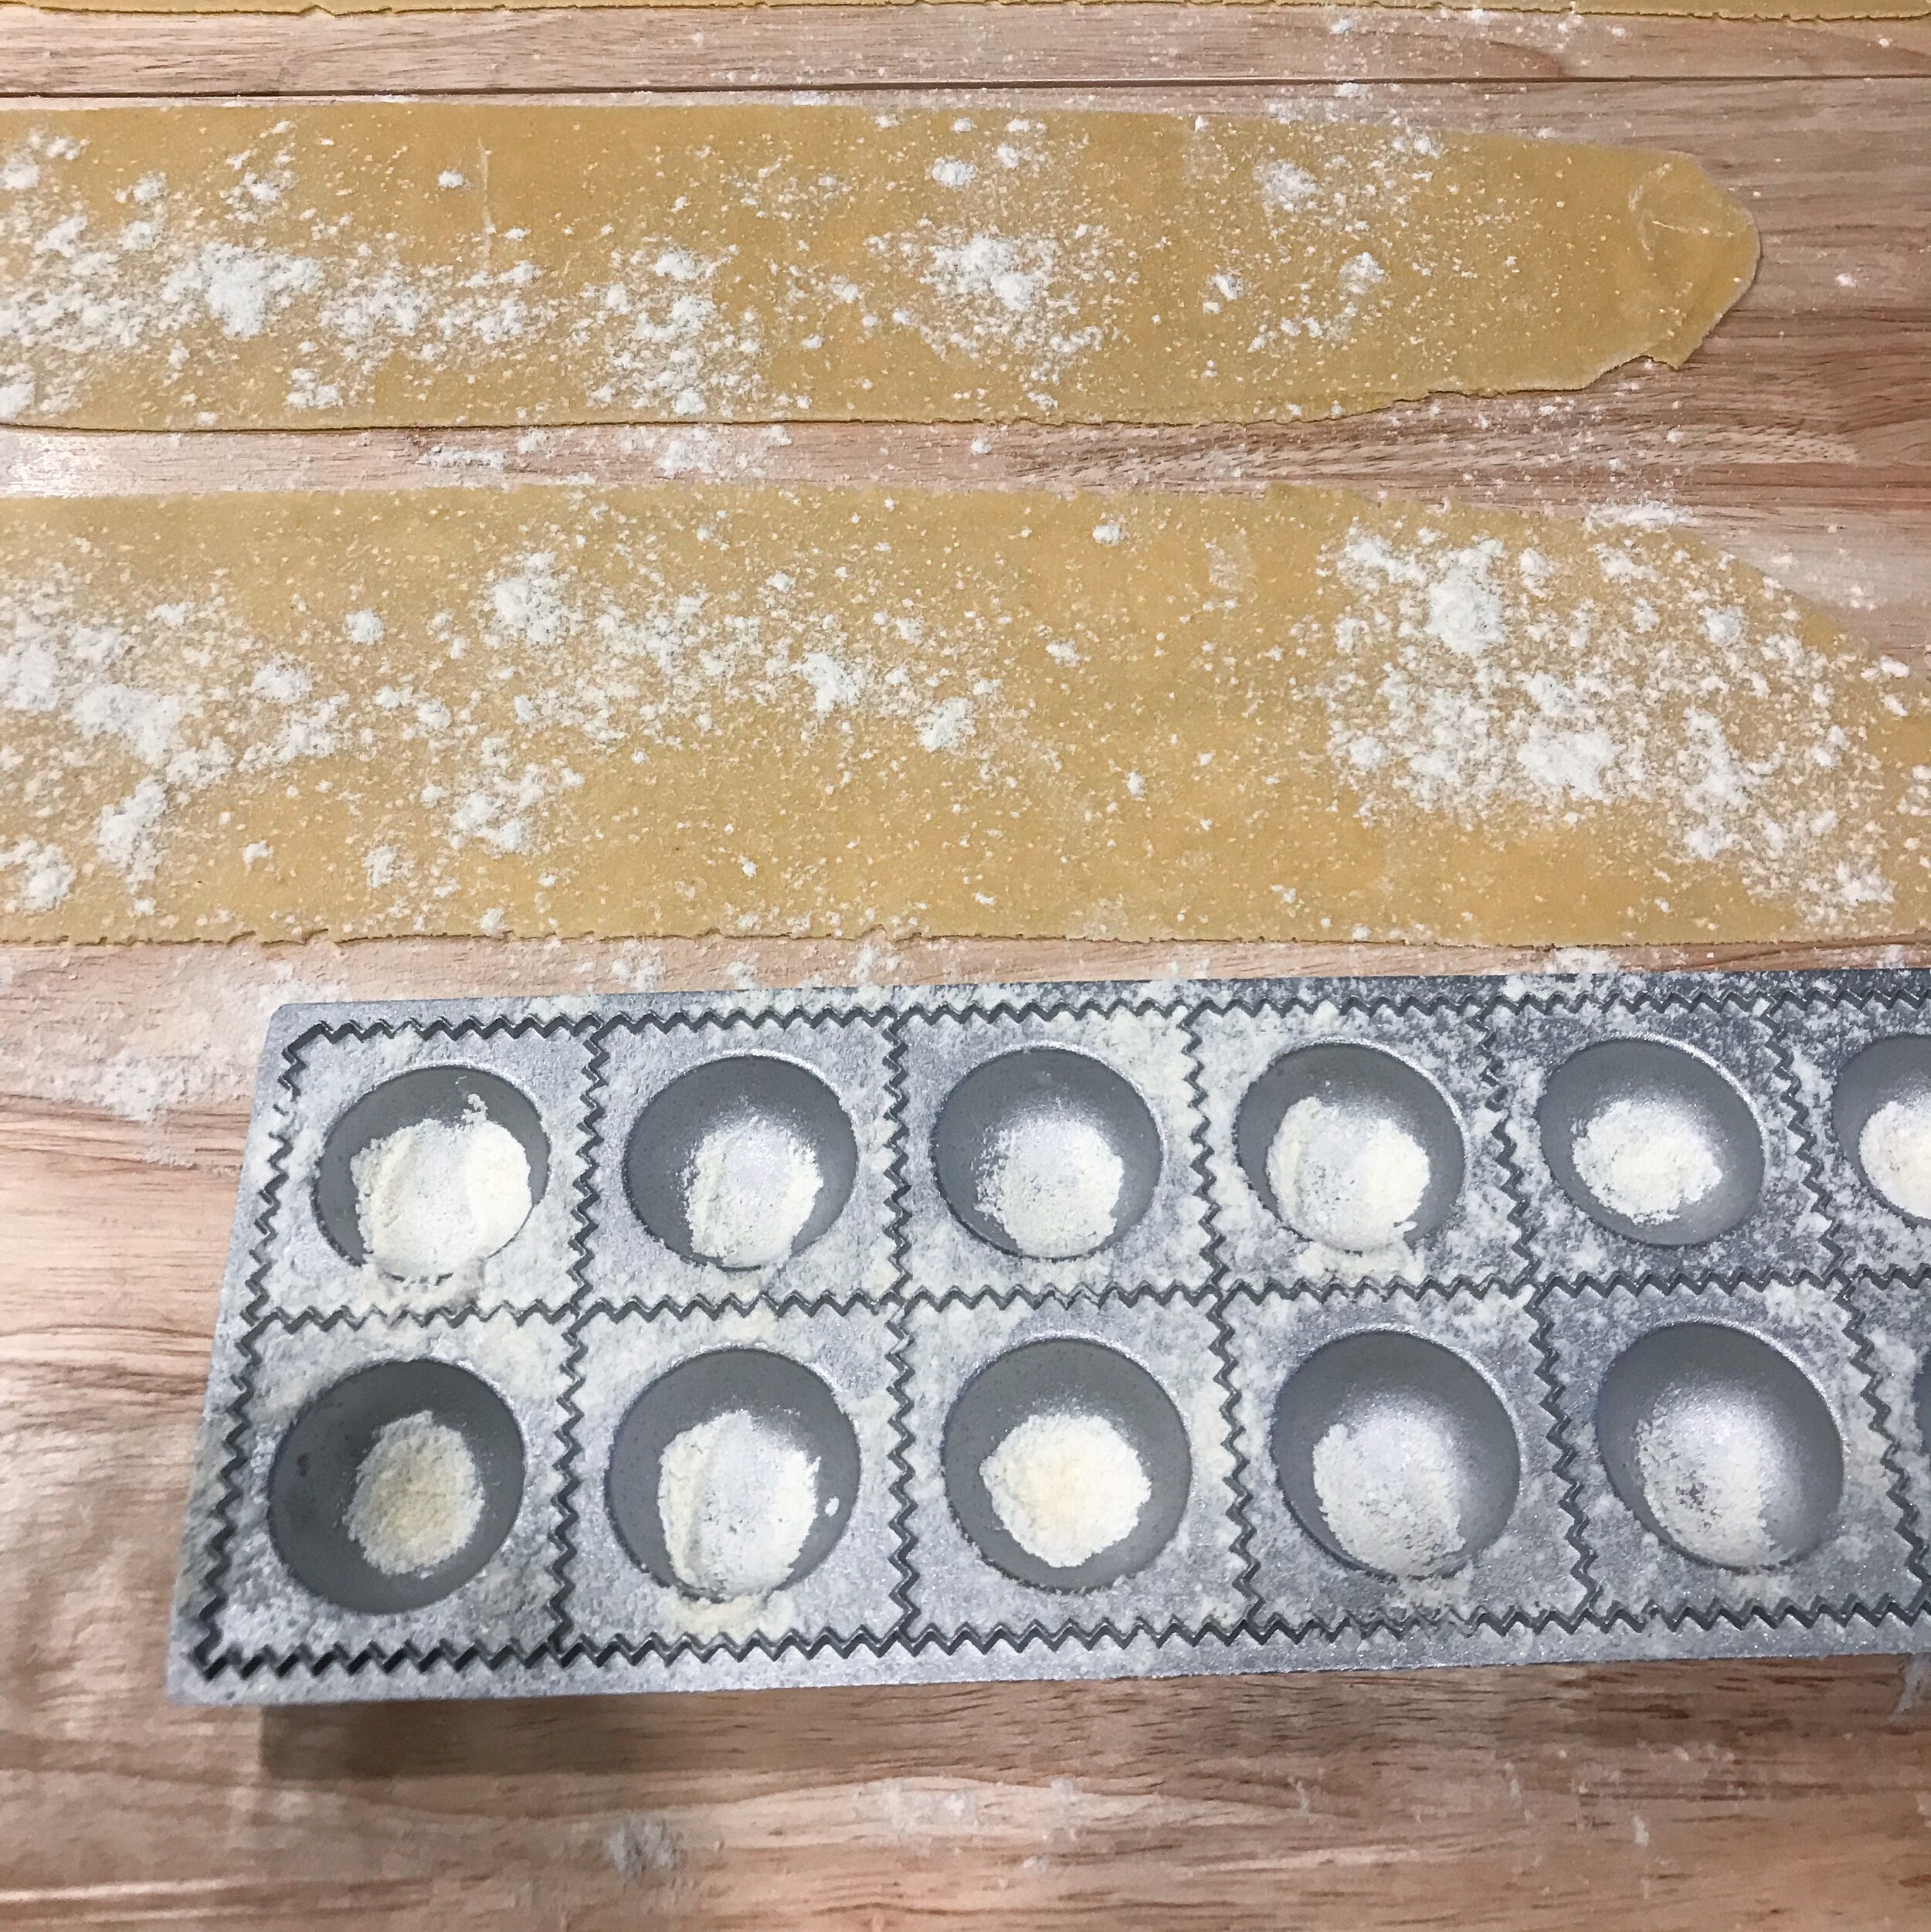 To make ravioli with a mold, stretch each sheet to fit the width of the mold.